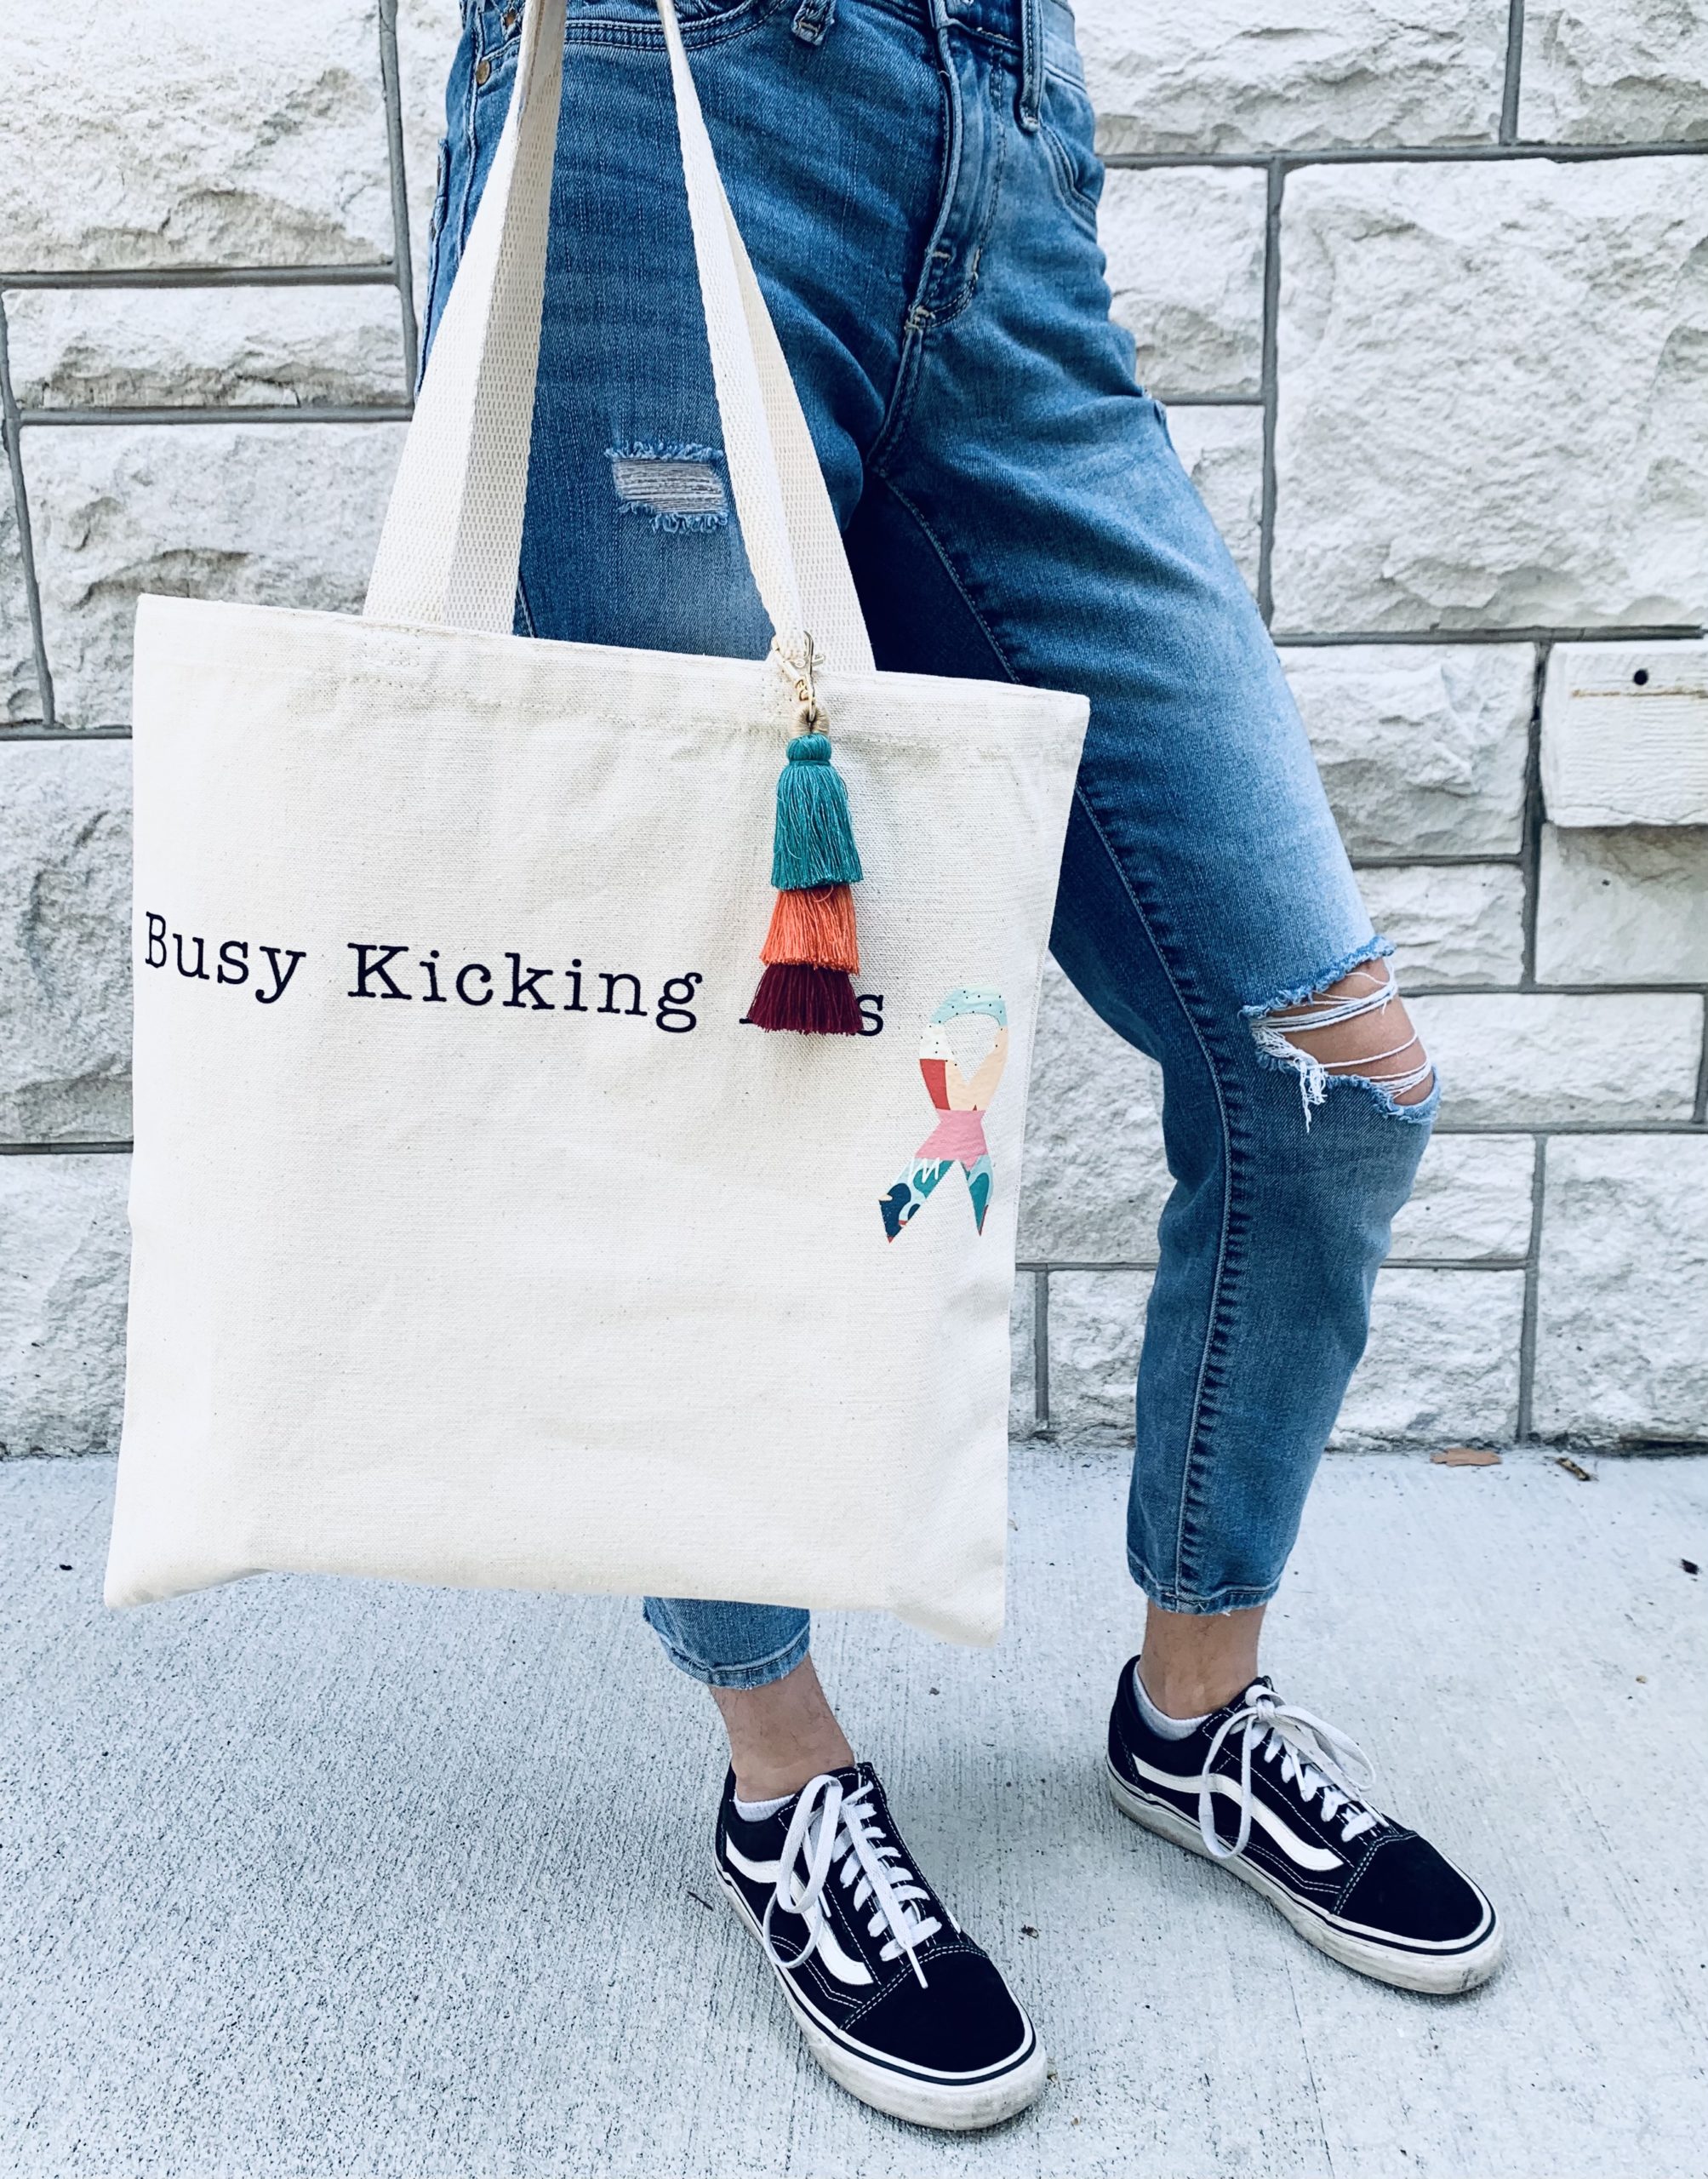 ChristyNg.com - Only while stocks last, get the Kick Ass and Slay for only  RM15.00 This versatile canvas tote makes the perfect eco friendly grocery  bag to take you through your grocery